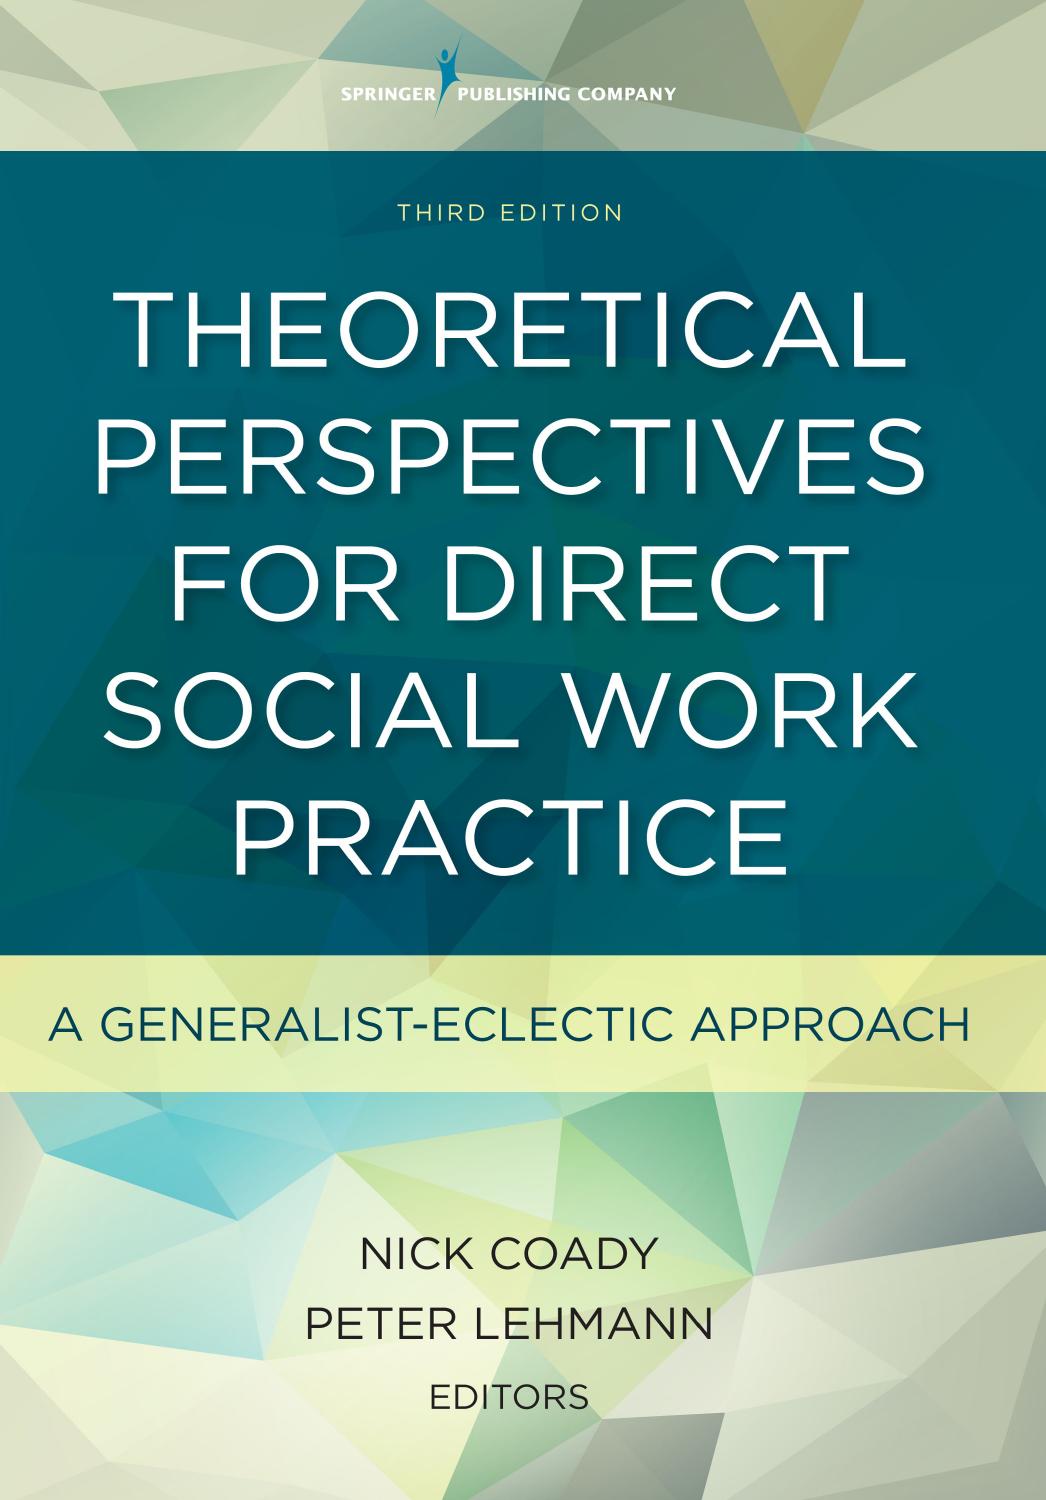 Theoretical Perspectives for Direct Social Work Practice: A Generalist-Eclectic Approach, Third Edition